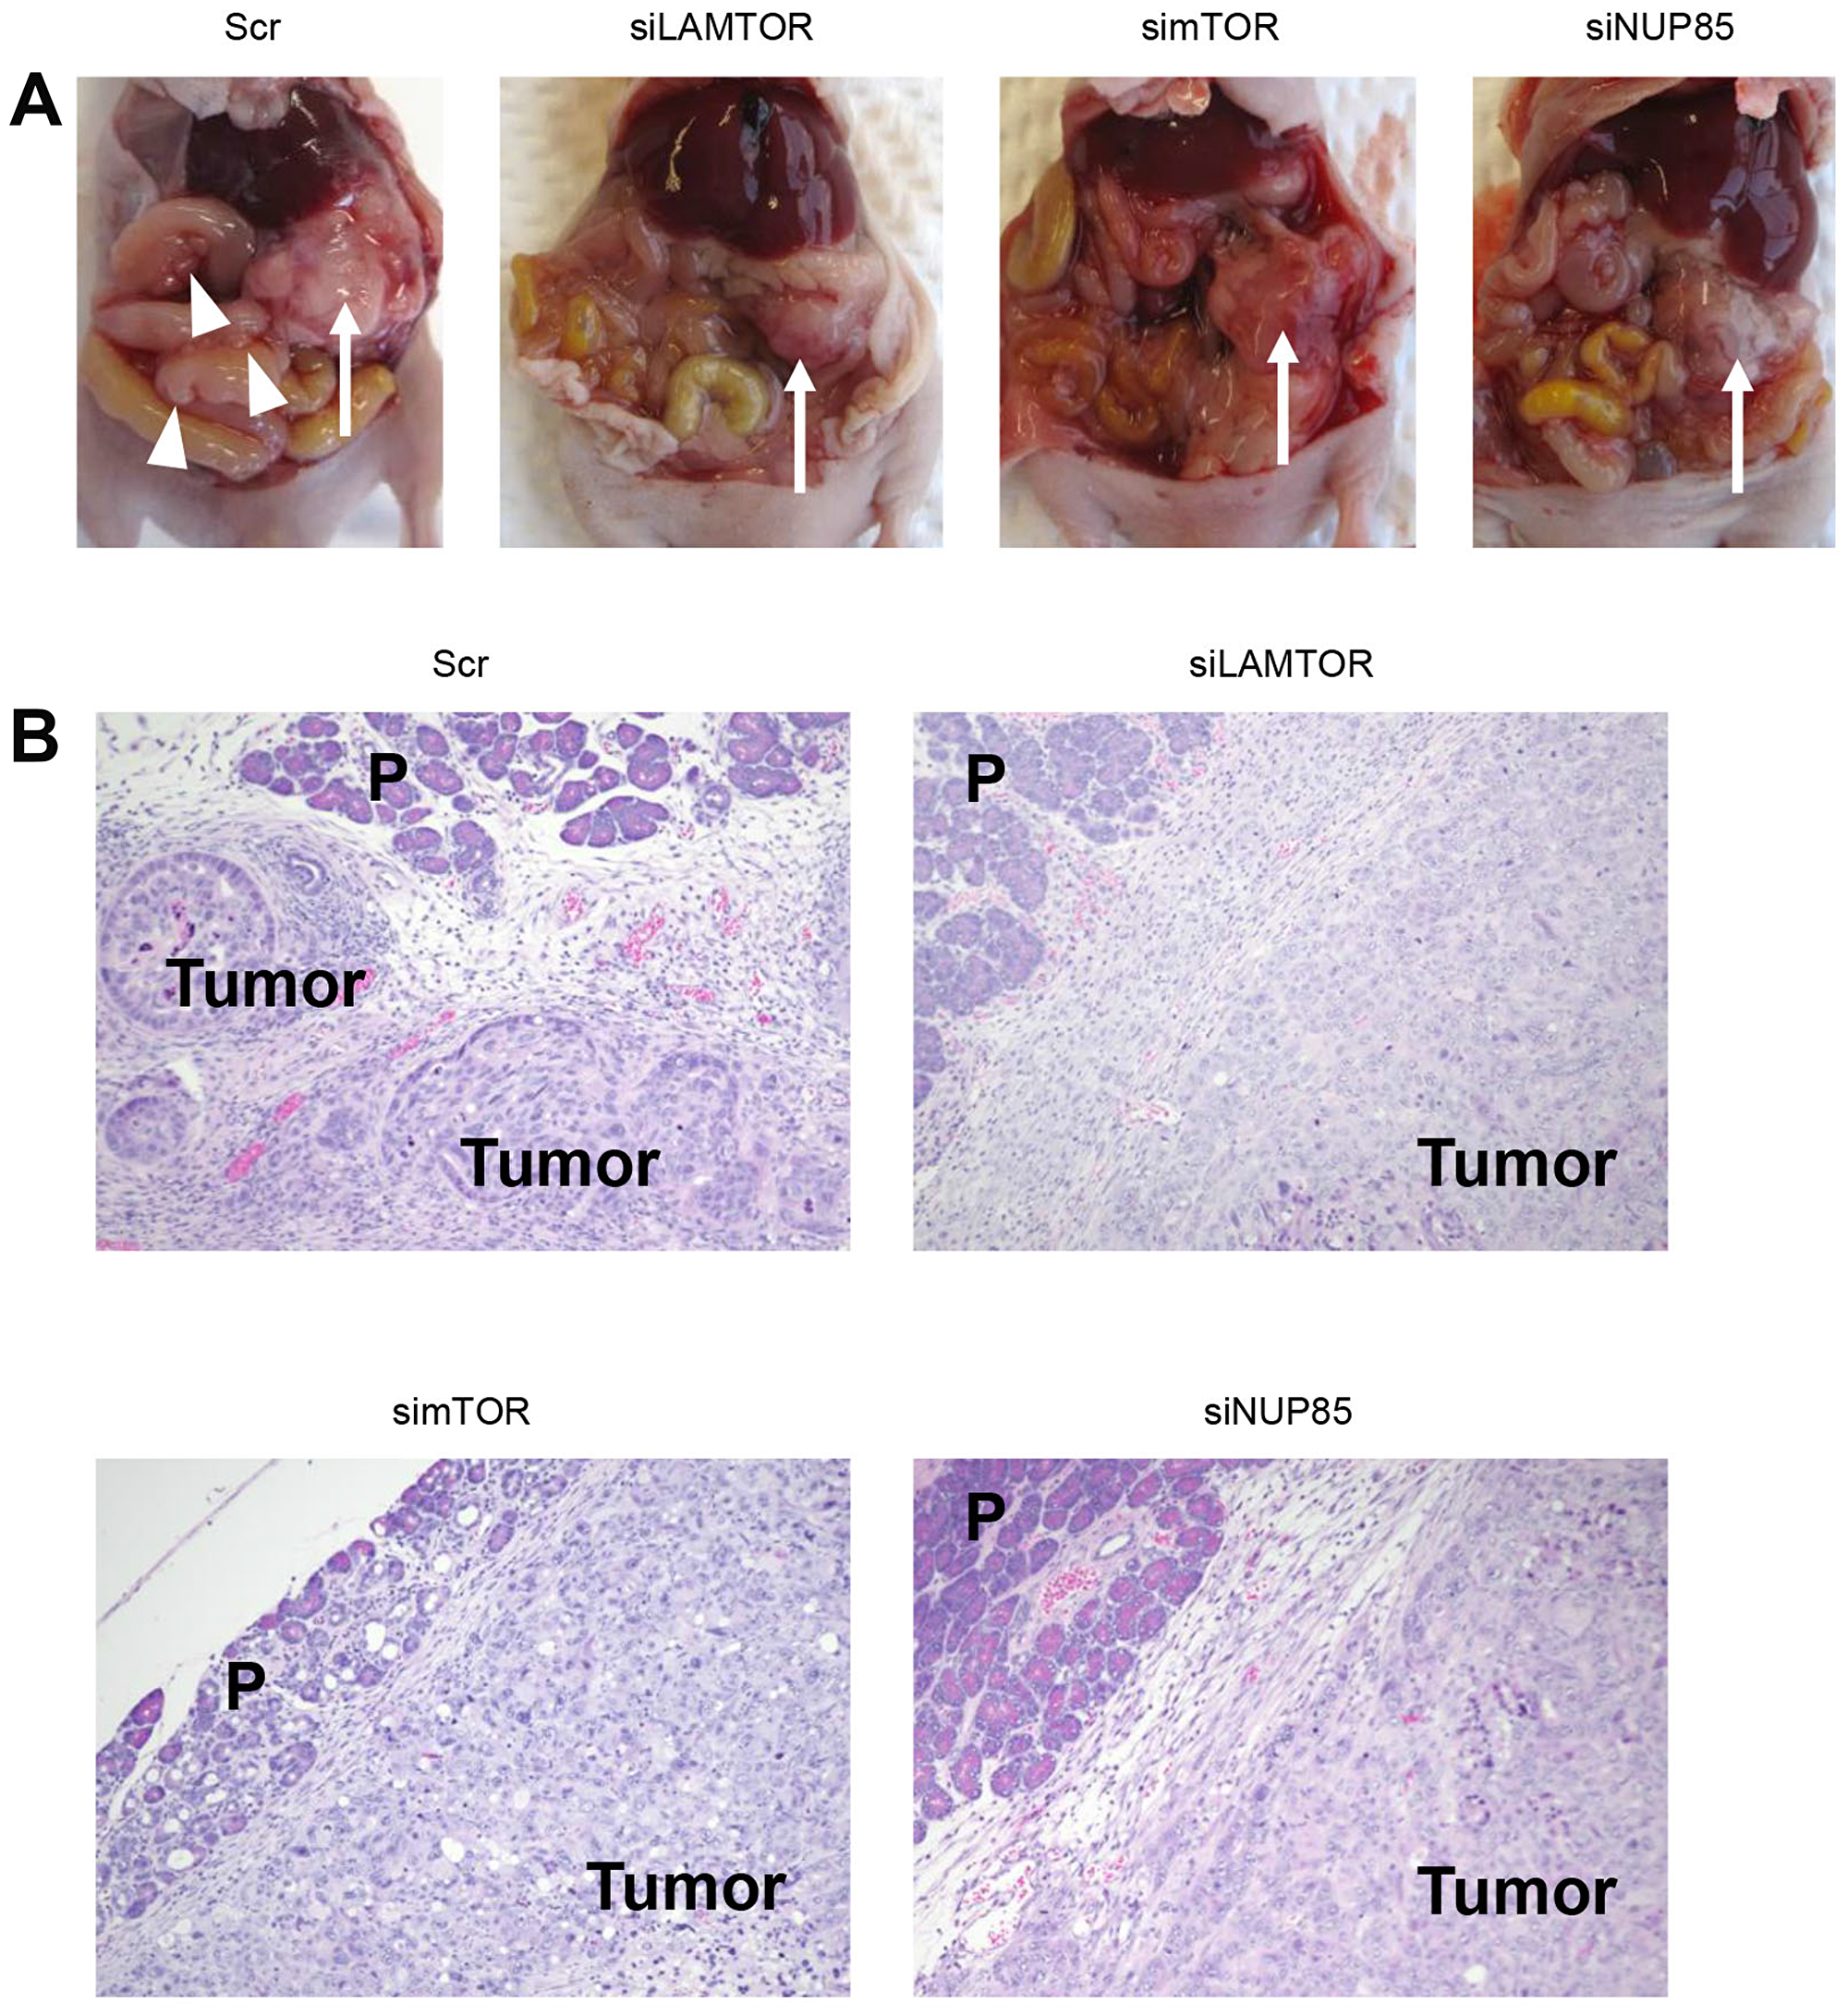 Disease progression in the orthotopic mouse model of PDAC.